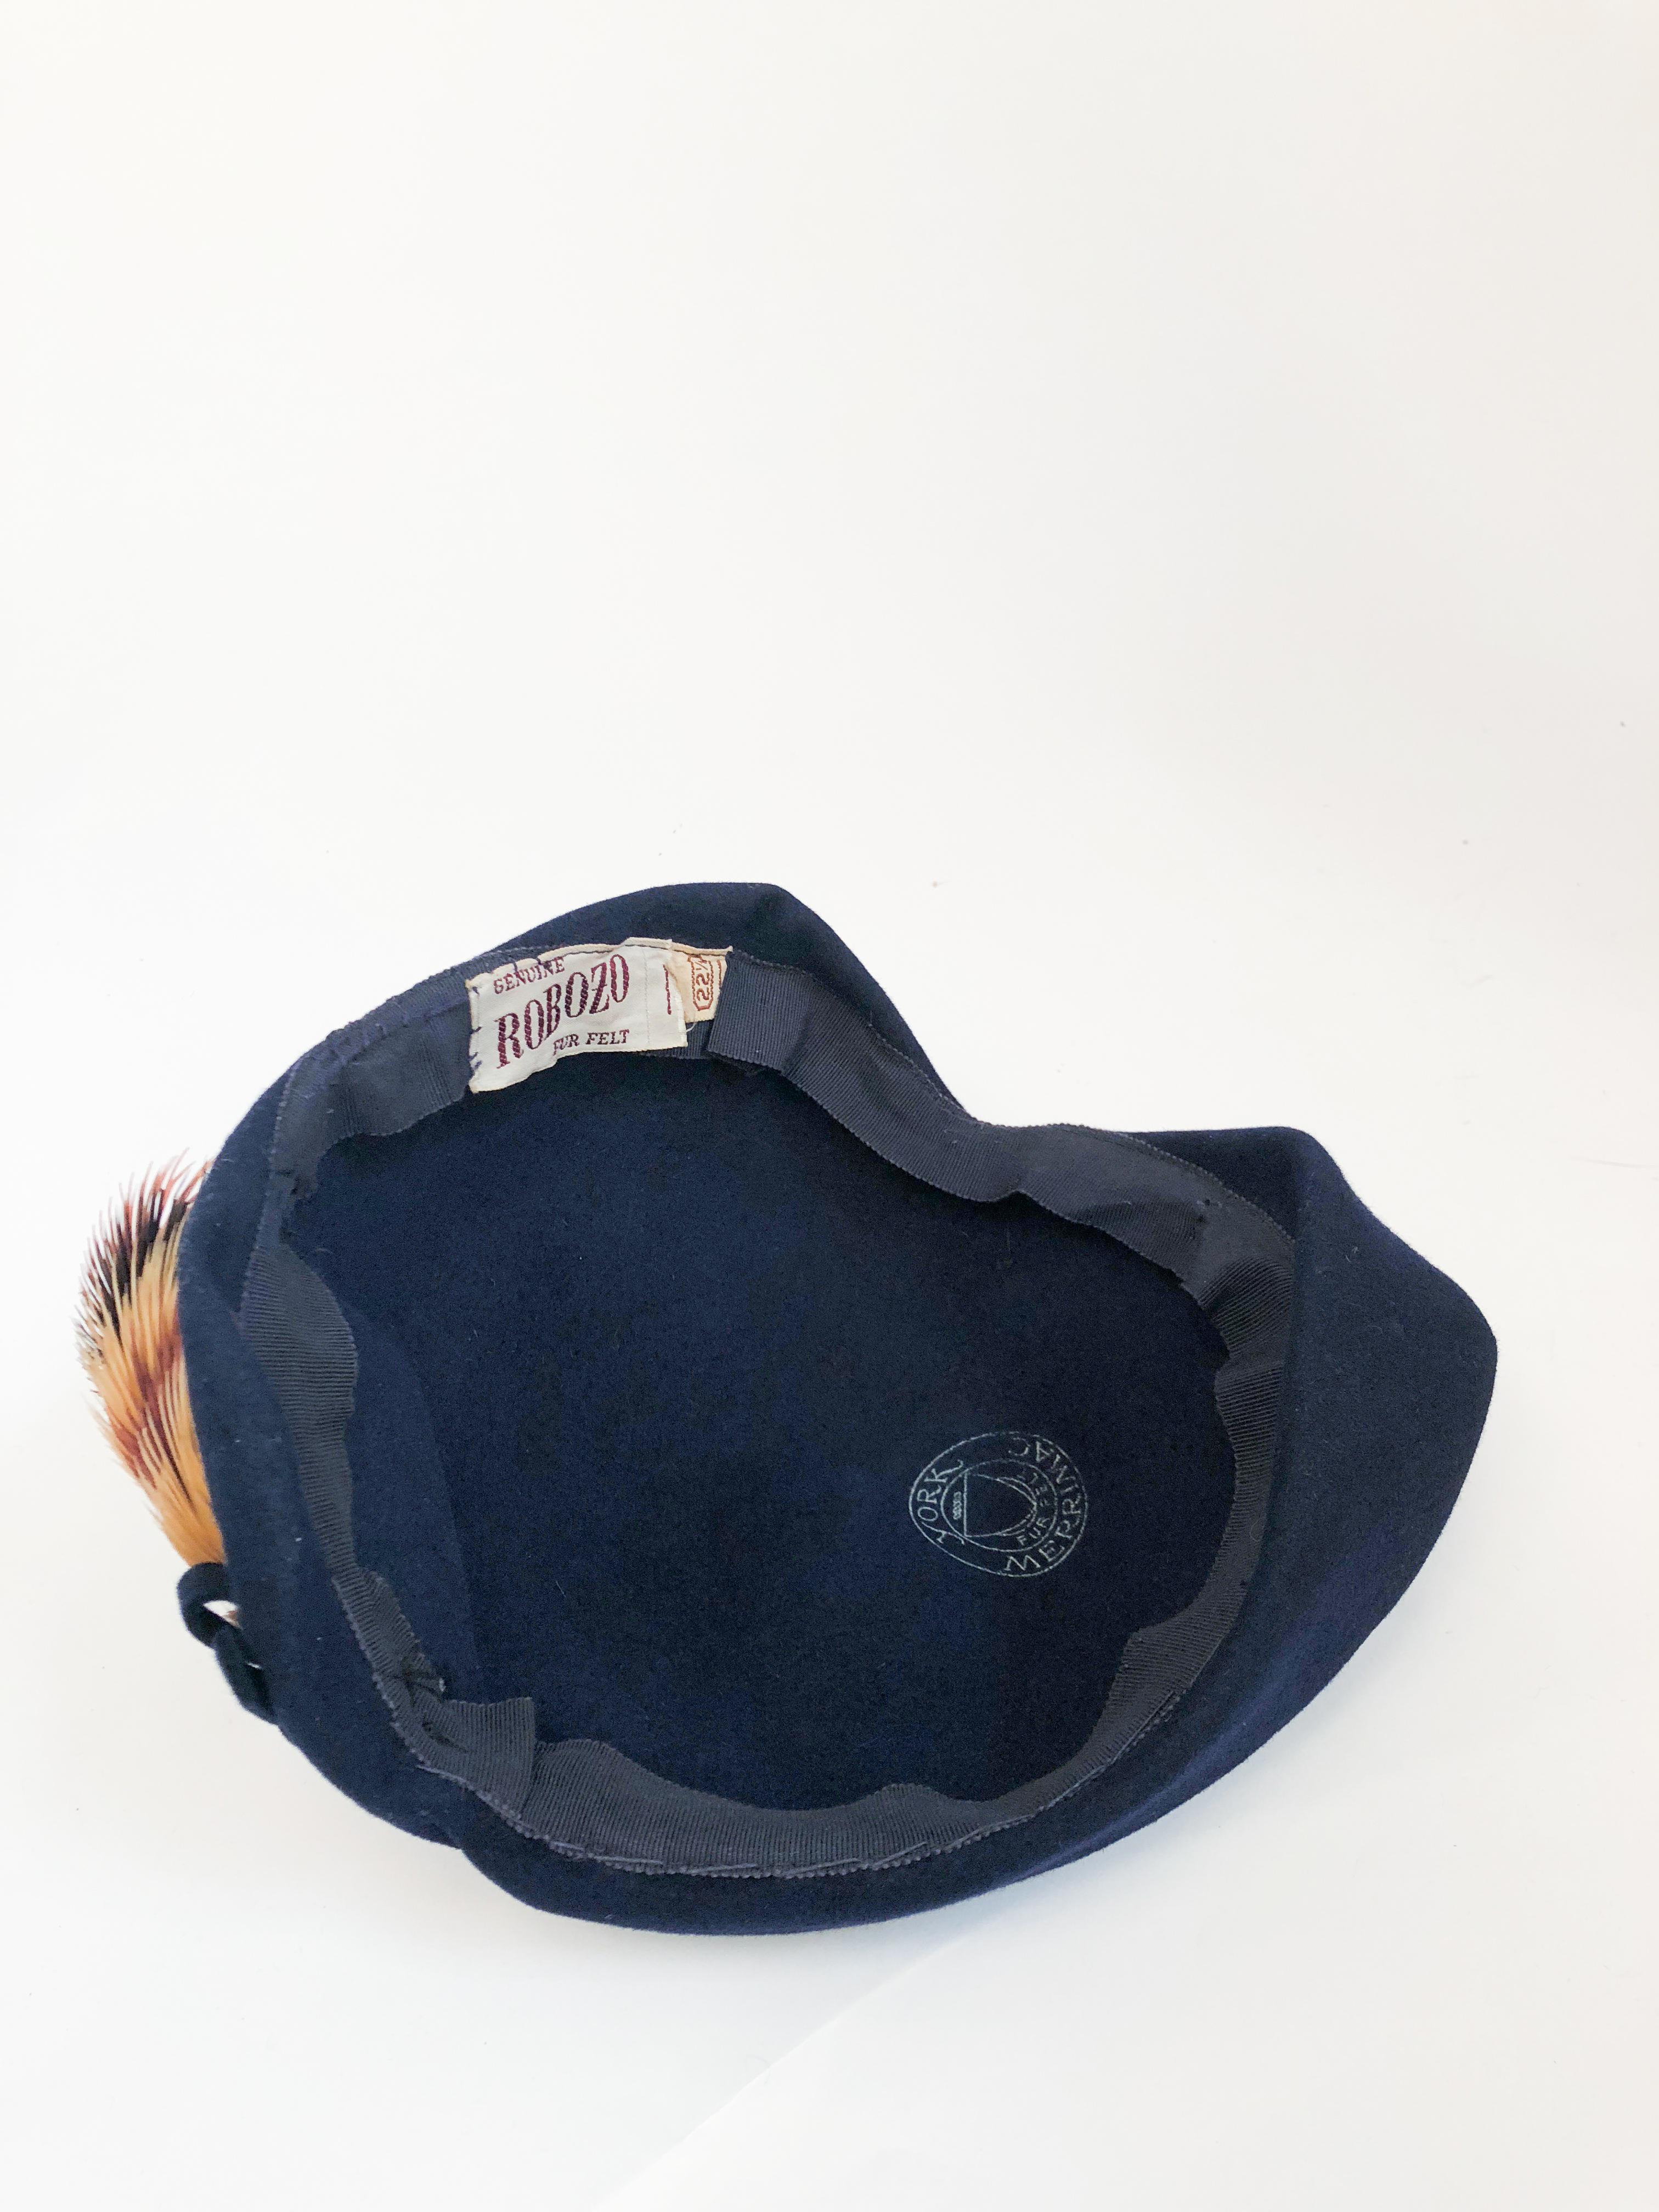 1950s Navy Felt hat with Decorative Feathers 1